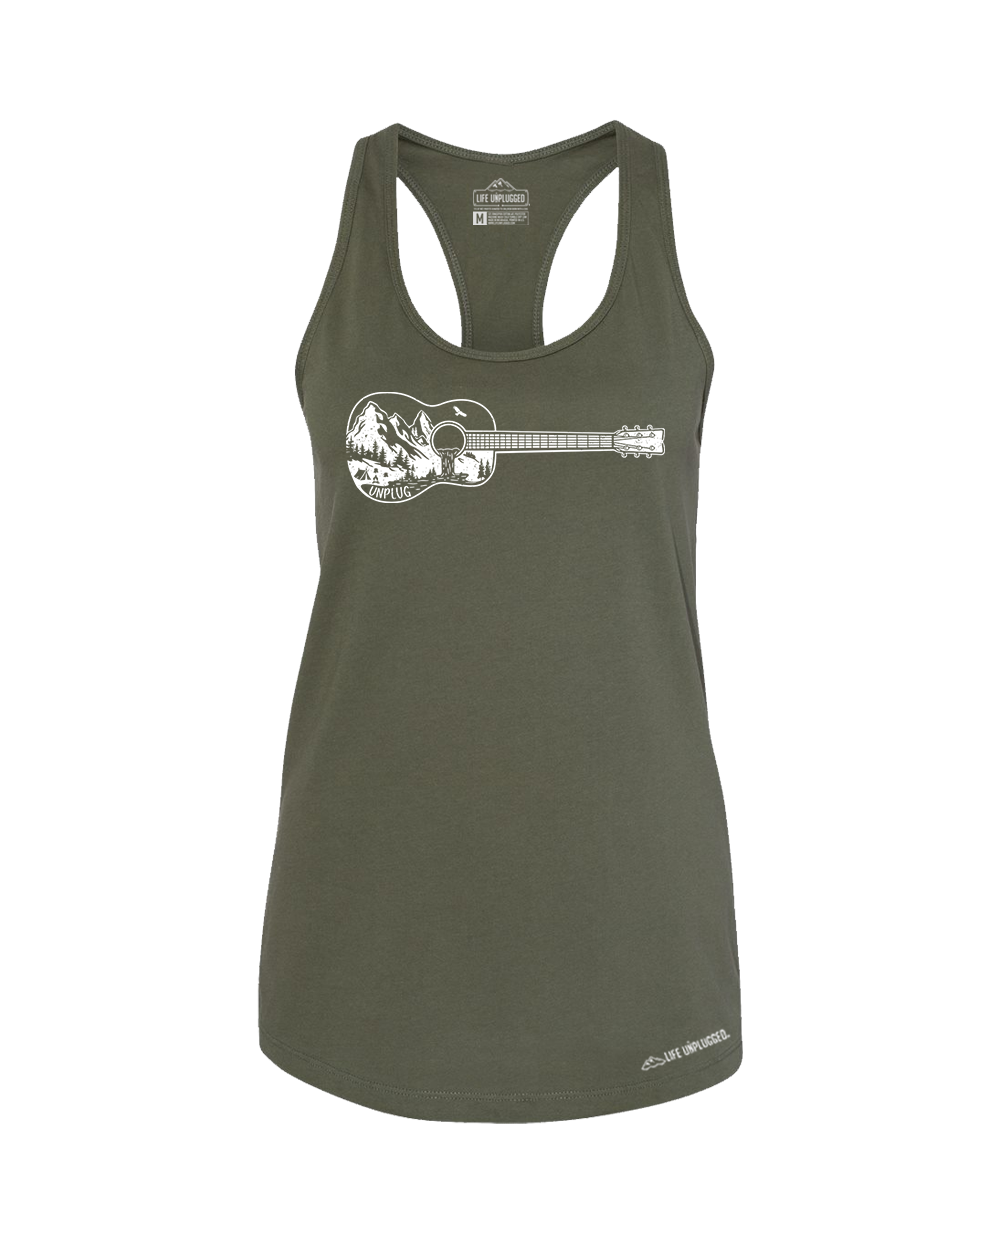 Guitar Mountain Scene Premium Women's Relaxed Fit Racerback Tank Top - Life Unplugged